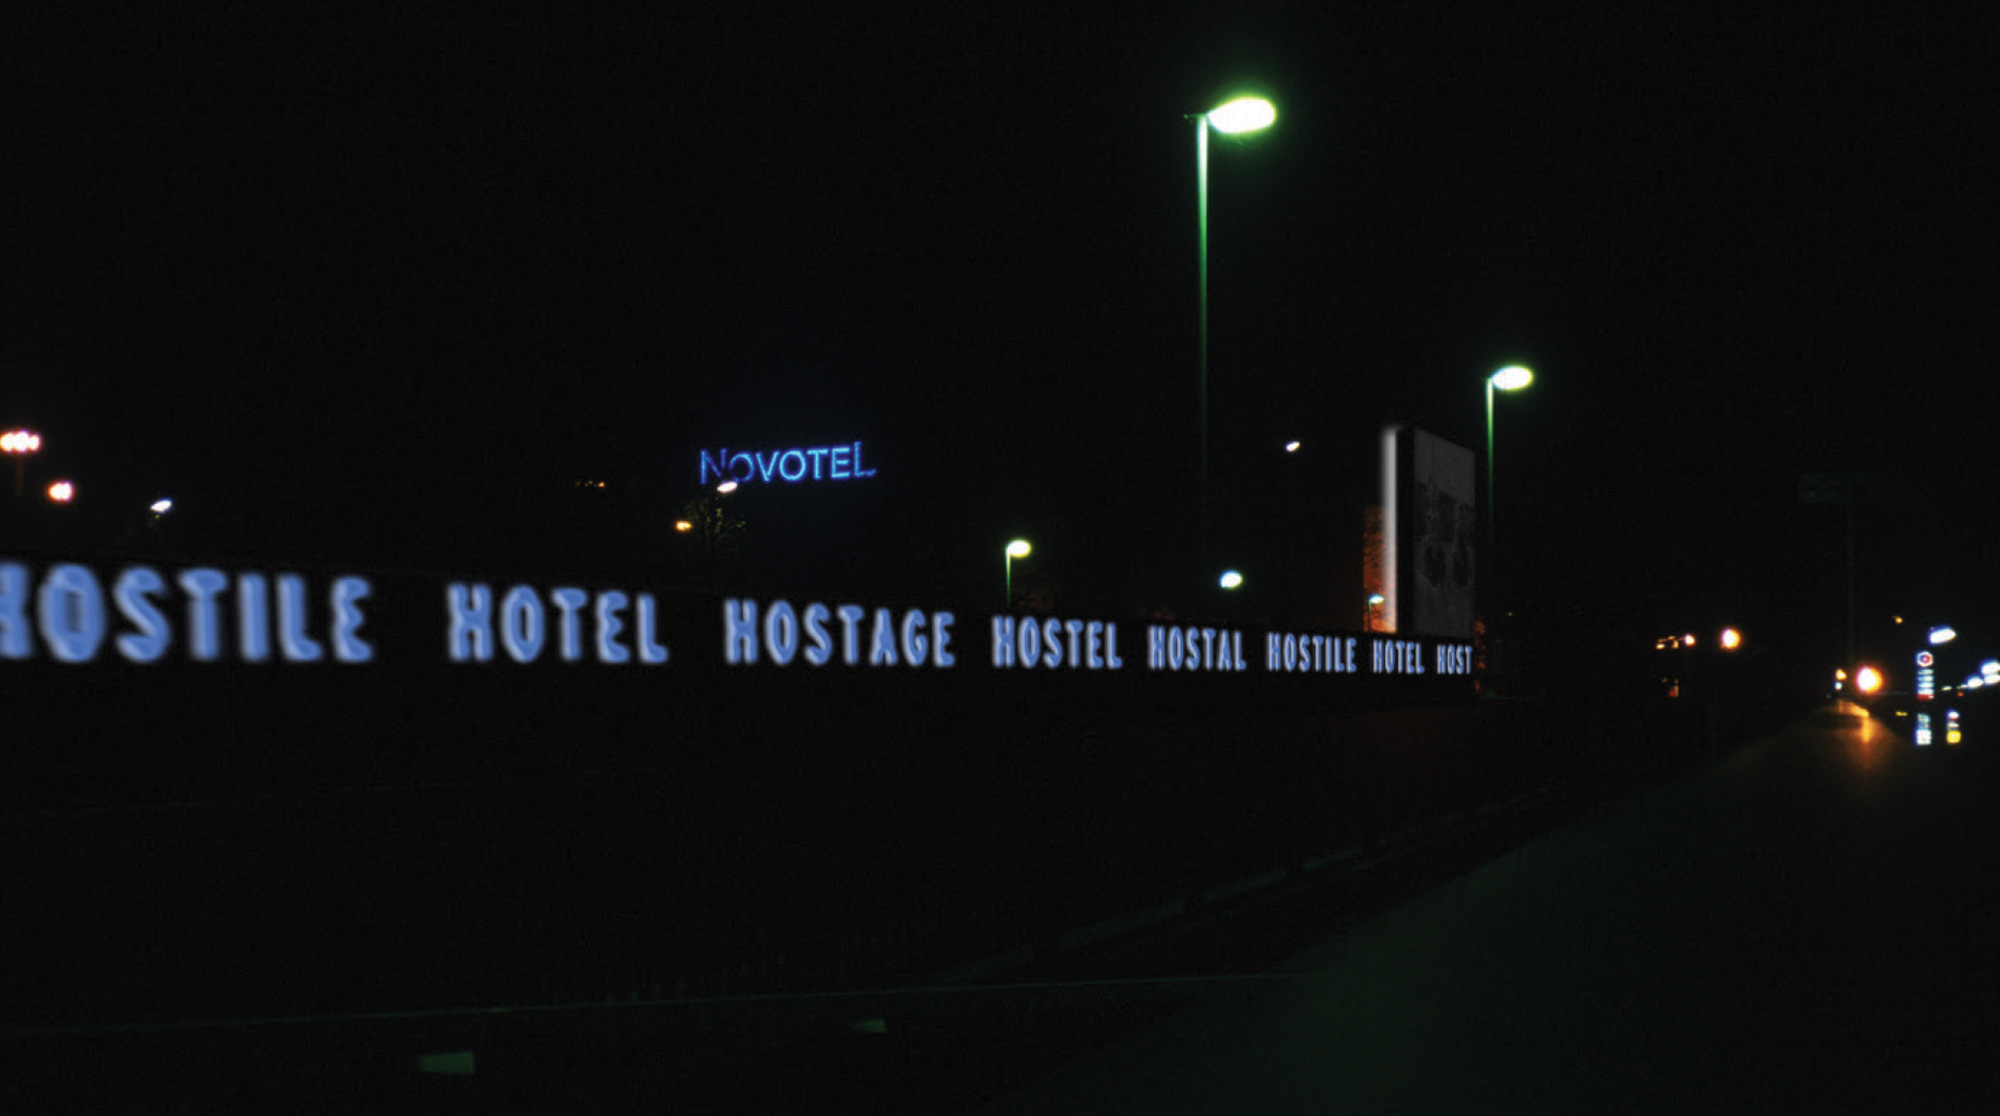 A photograph at night of lit neon signs wrapping around the hotel, reading “Hostile Hotel Hostage Hostal...”